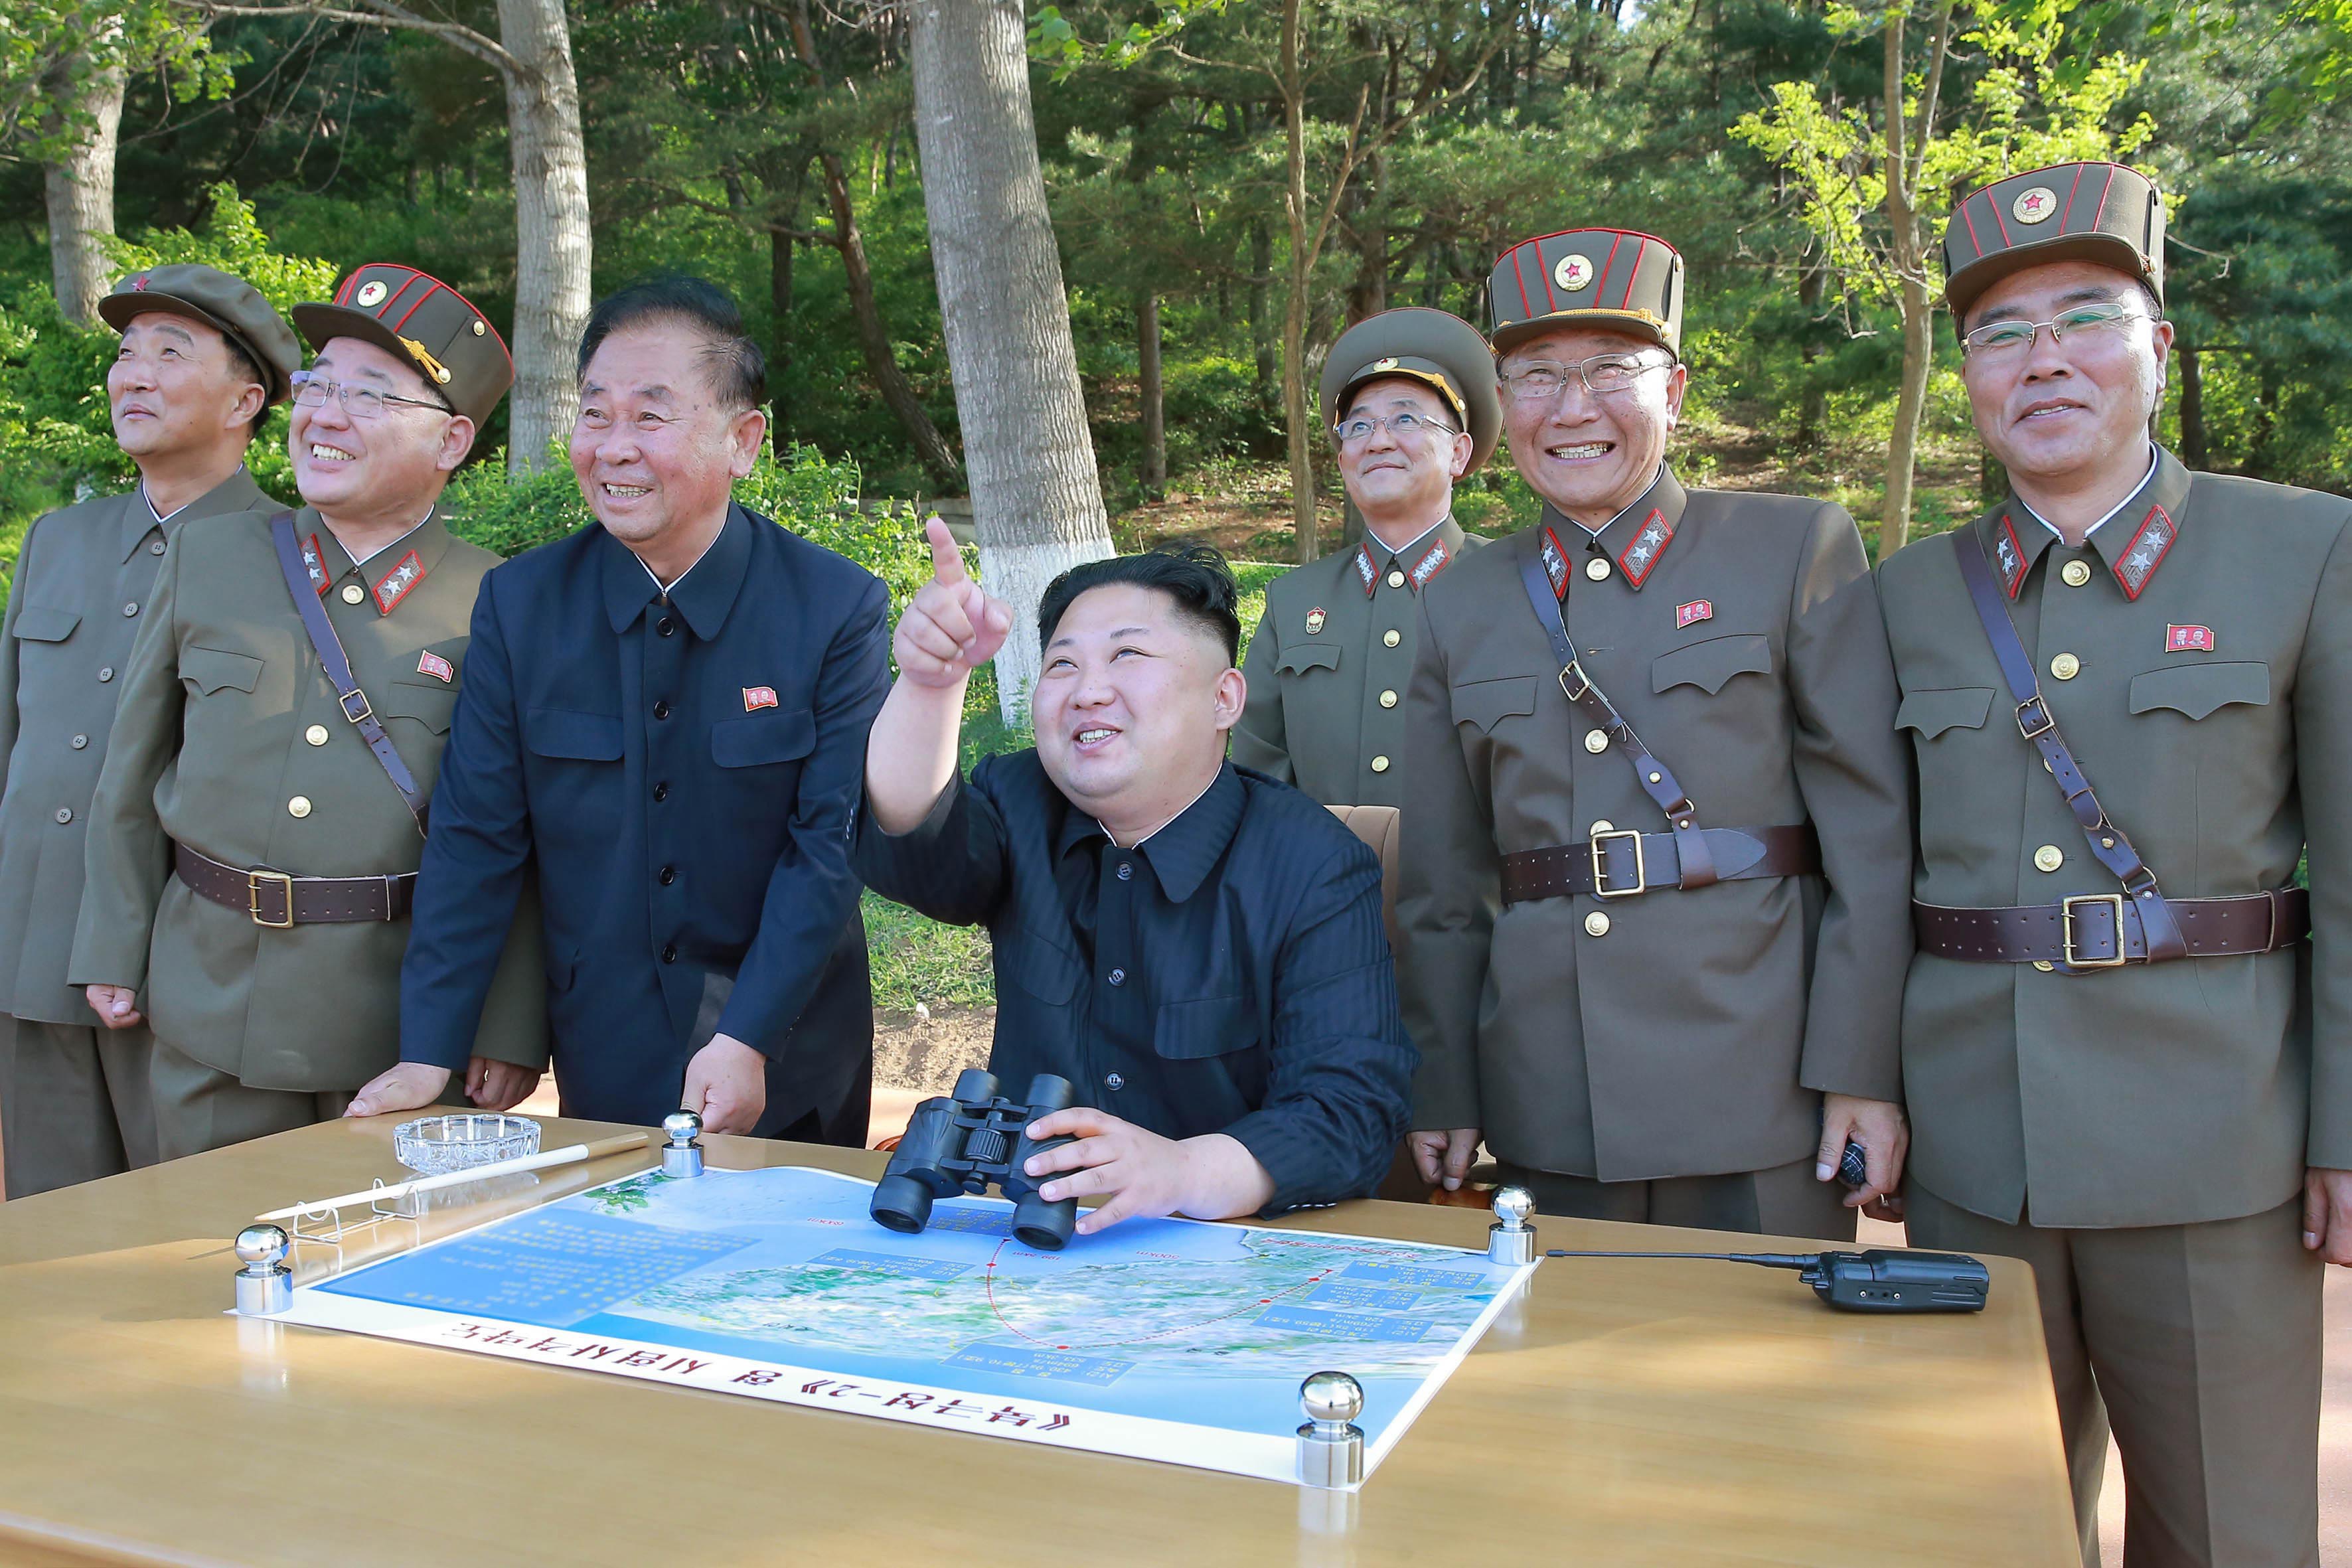 2017-07-29 00:00:00 epa06115683 (FILE) - An undated photo made available by the North Korean Central News Agency (KCNA), the state news agency of North Korea, shows North Korean Supreme Leader Kim Jong-un (C) supervising the test-fire of a ground-to-ground medium-to-long range strategic ballistic missile Pukguksong-2 at an undisclosed location in North Korea (reissued 29 July 2017). According to South Korea's Joint Chiefs of Staff, North Korea has test-fired a ballistic missile into the East Sea on 28 July 2017, from the North's Jagang Province. North Korean leader Kim Jong-un hailed the latest intercontinental ballistic missile test as a success claiming he could strike the entire continental US, state media reported. EPA/KCNA EDITORIAL USE ONLY